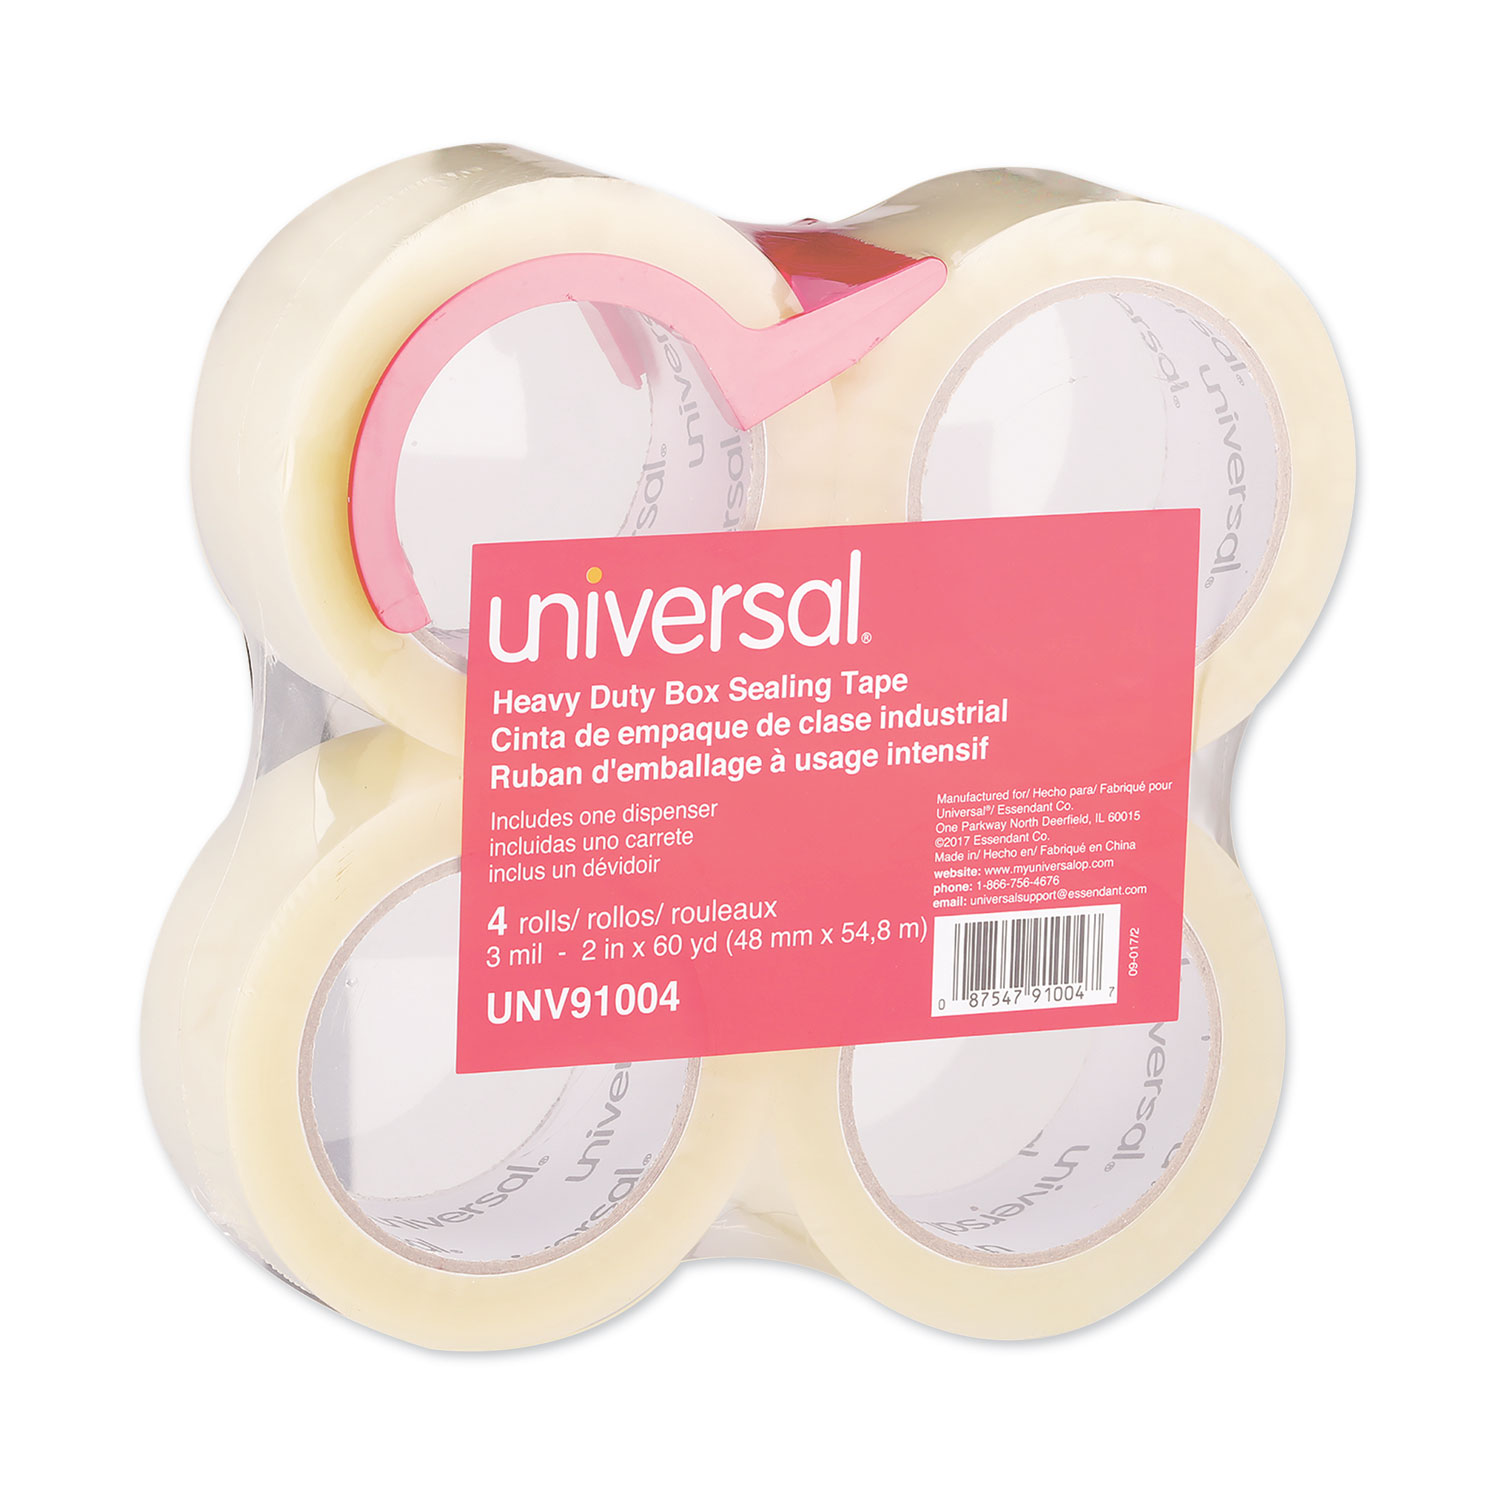  Universal UNV91004 Heavy-Duty Box Sealing Tape with Dispenser, 3 Core, 1.88 x 60 yds, Clear, 4/Box (UNV91004) 